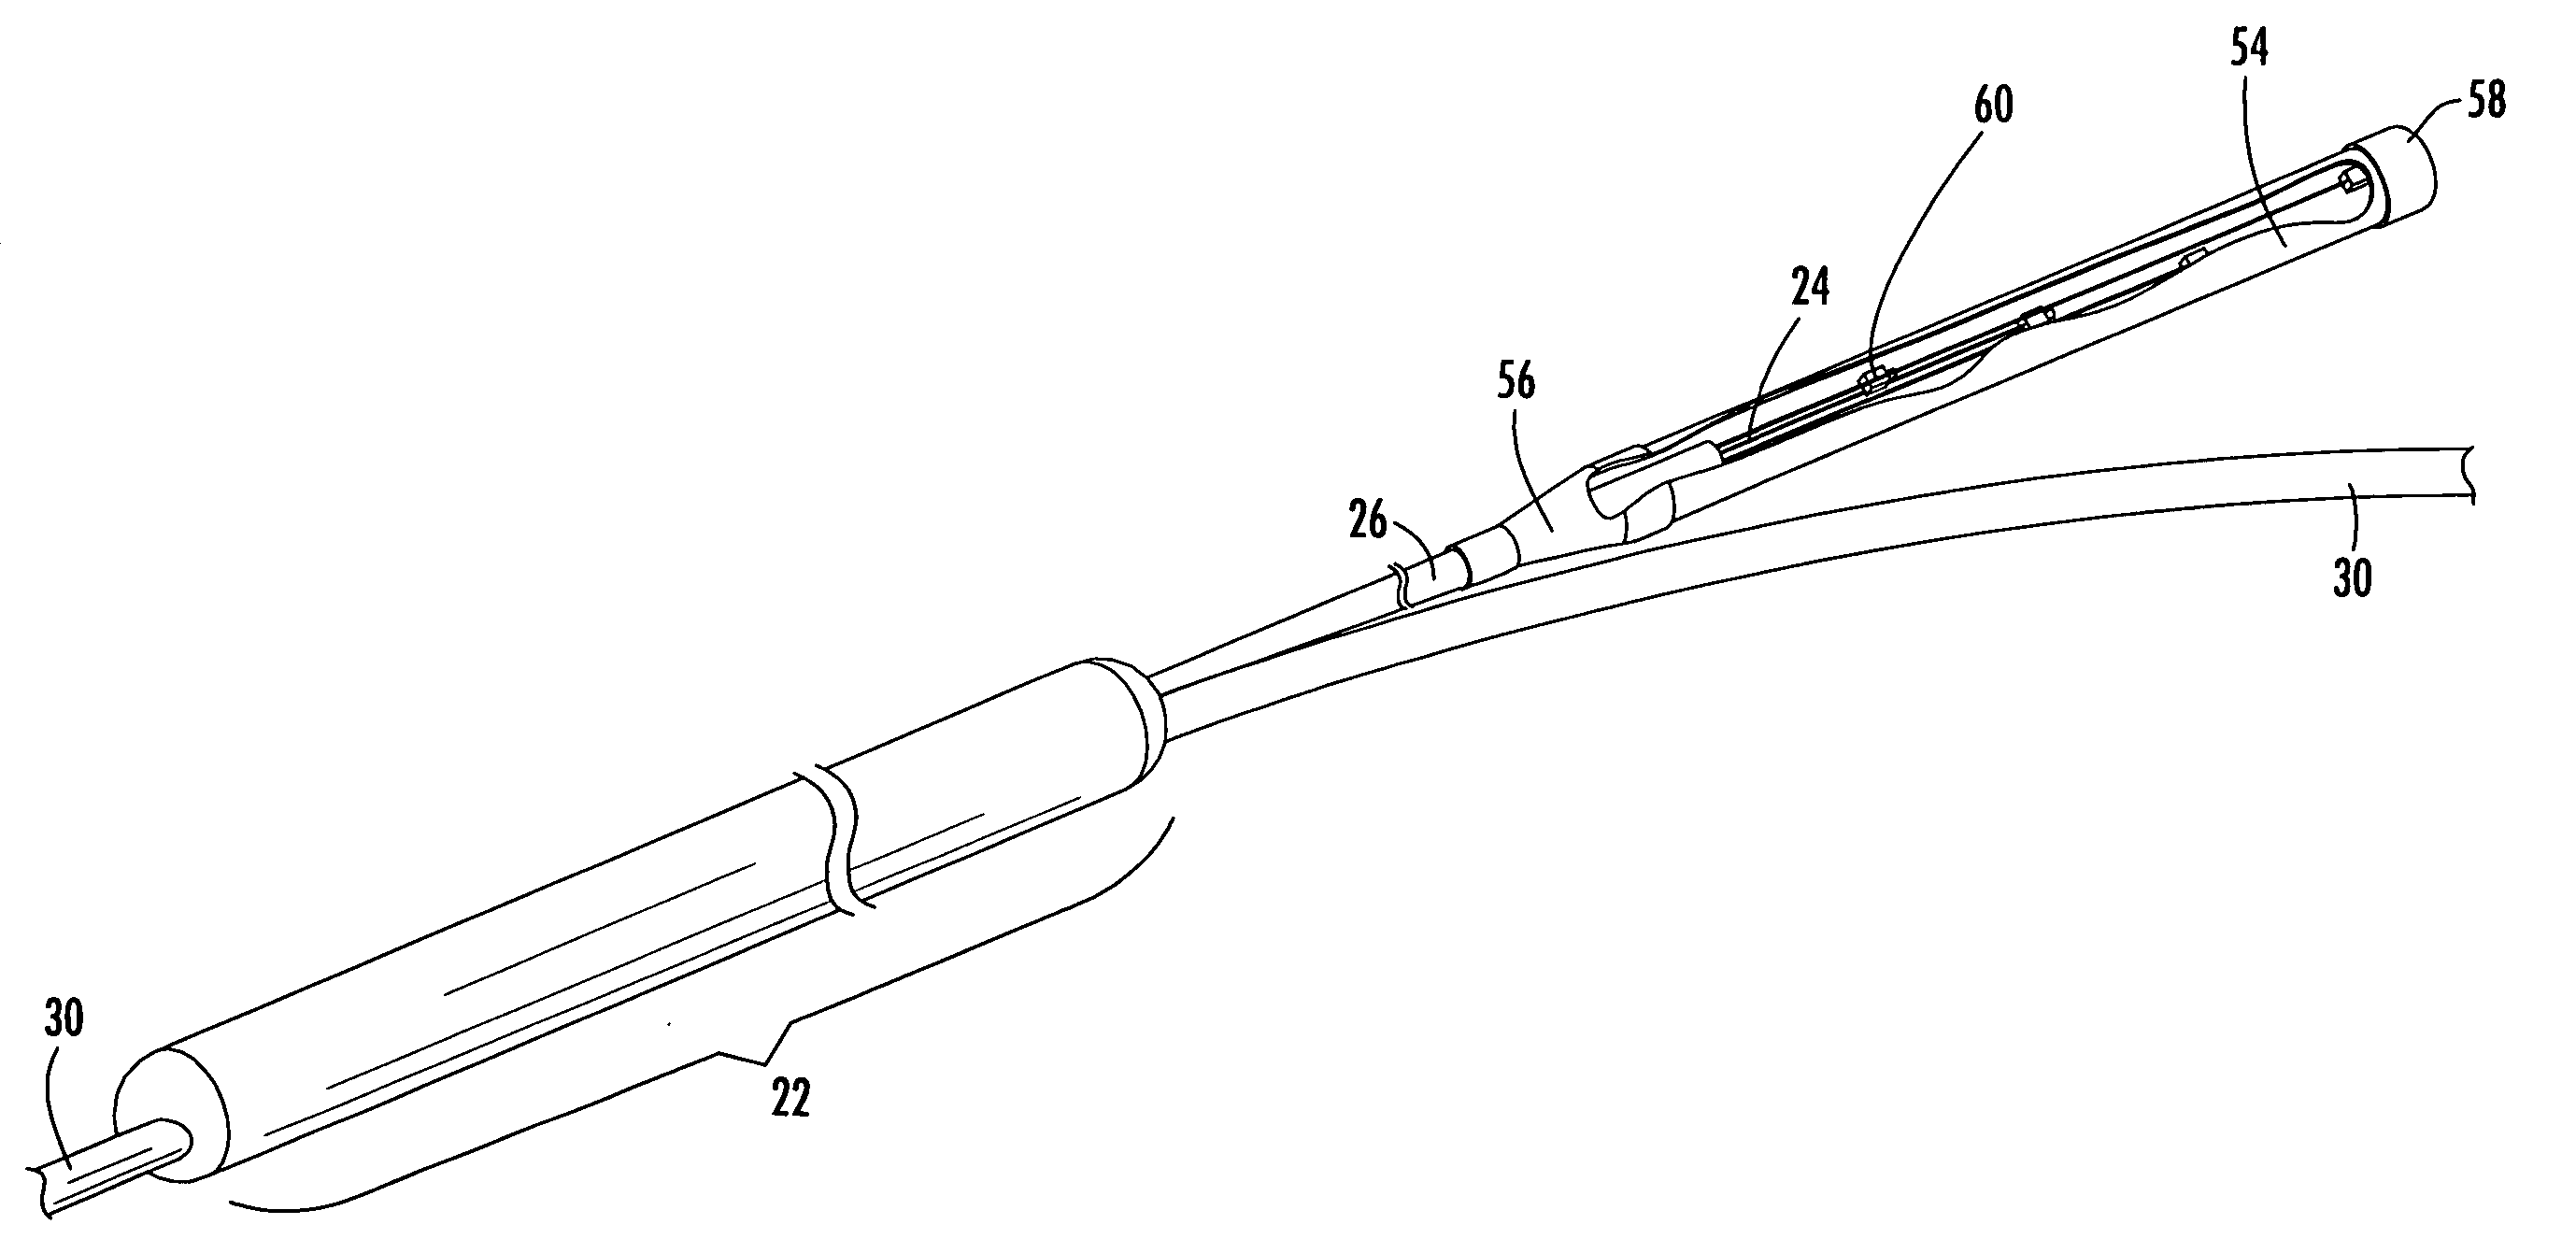 Distribution cable assembly having overmolded mid-span access location